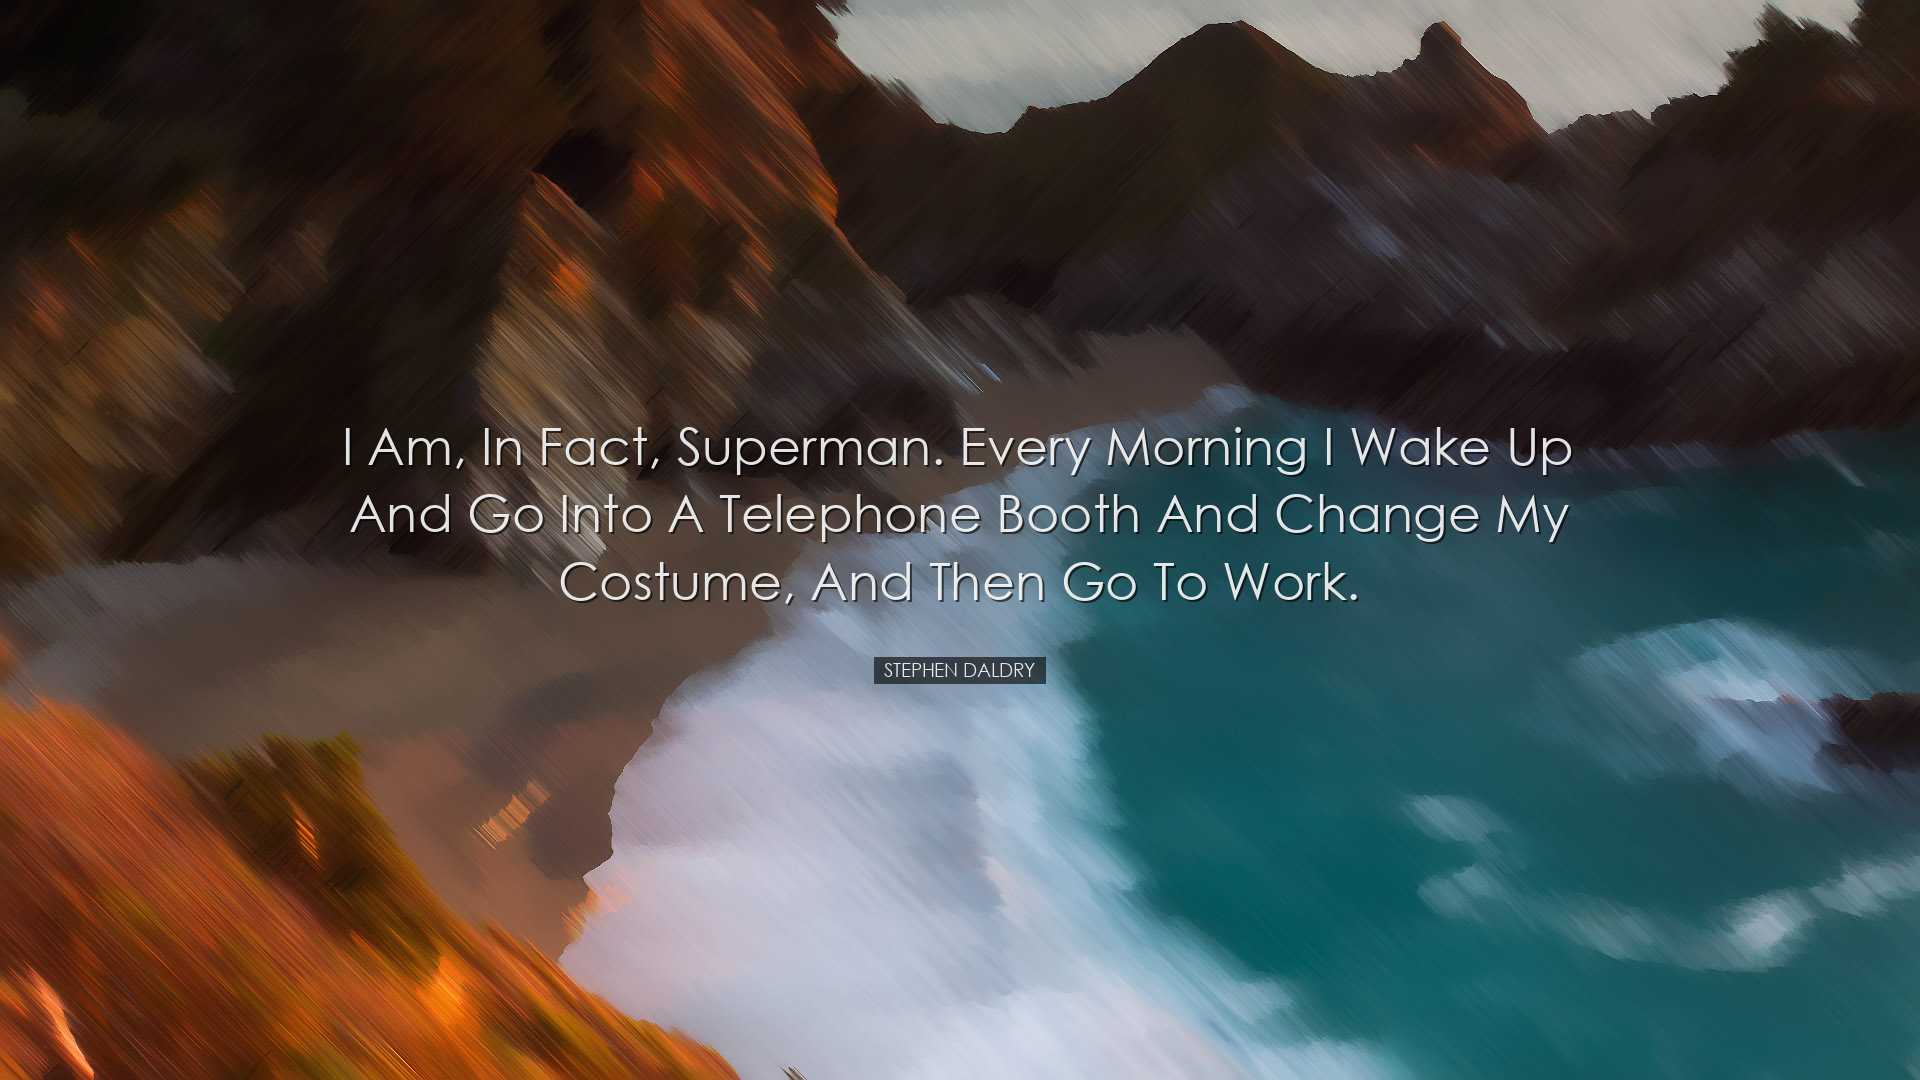 I am, in fact, Superman. Every morning I wake up and go into a tel